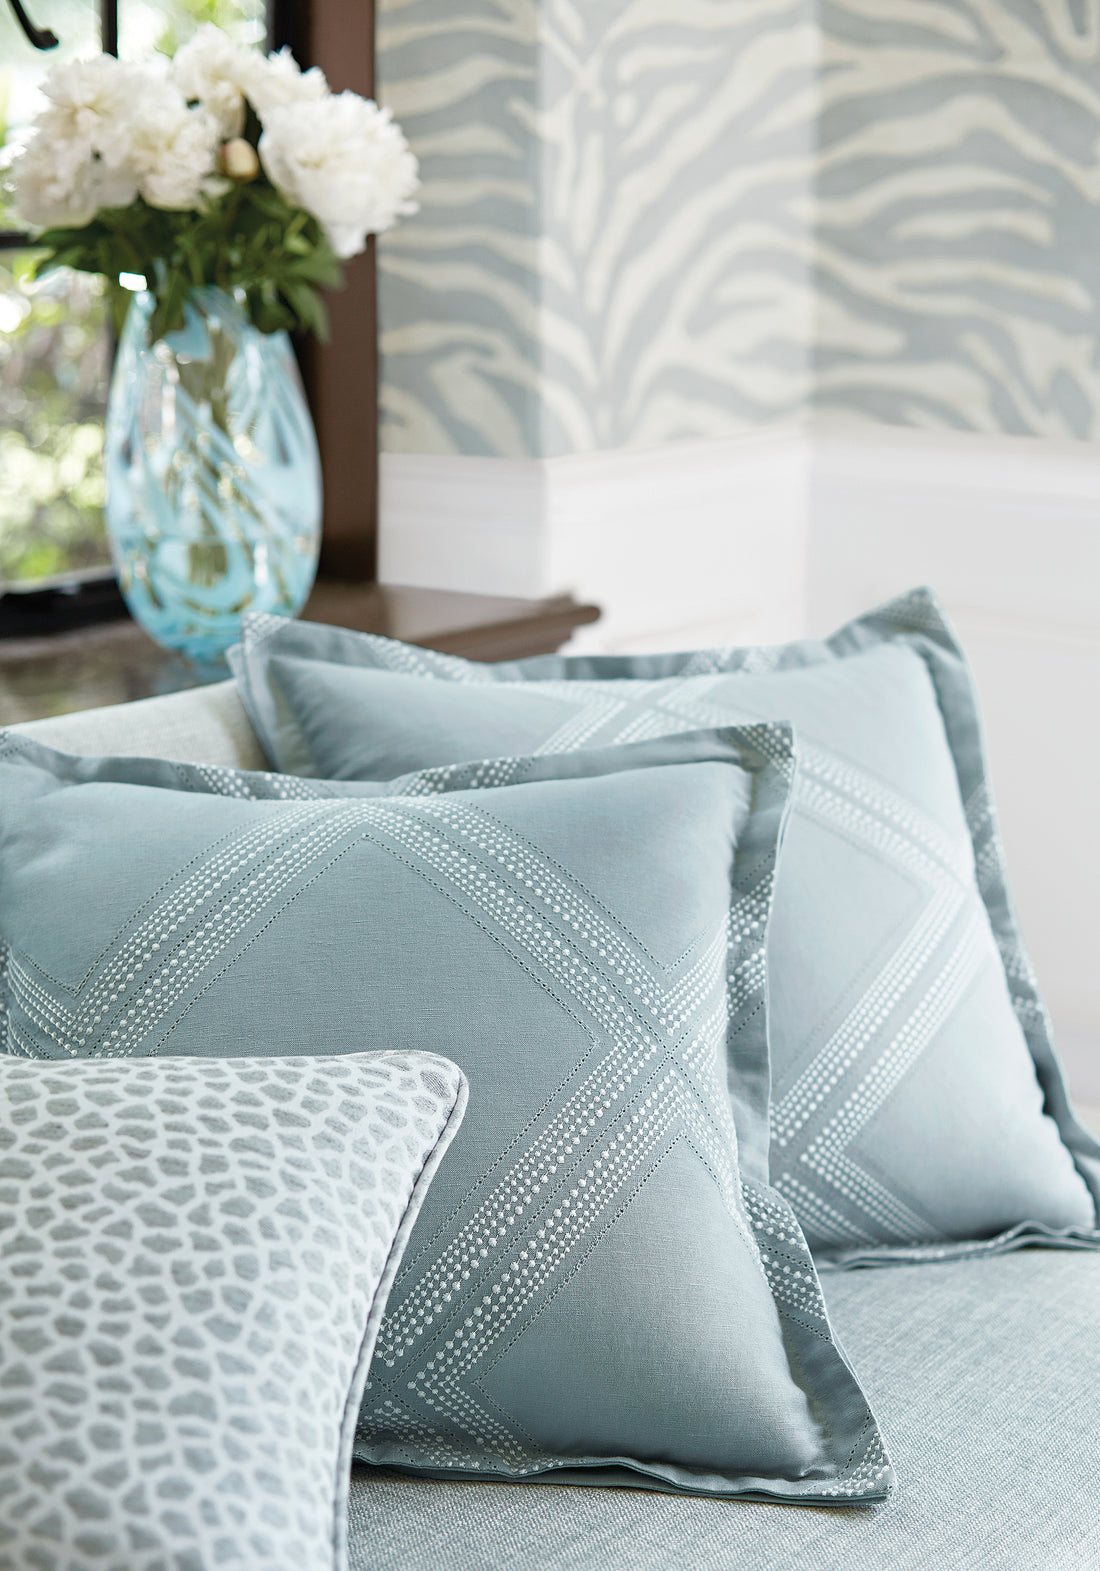 Pillows featuring Diamond Head Embroidery fabric in aqua color - pattern number W785014 - by Thibaut in the Greenwood collection